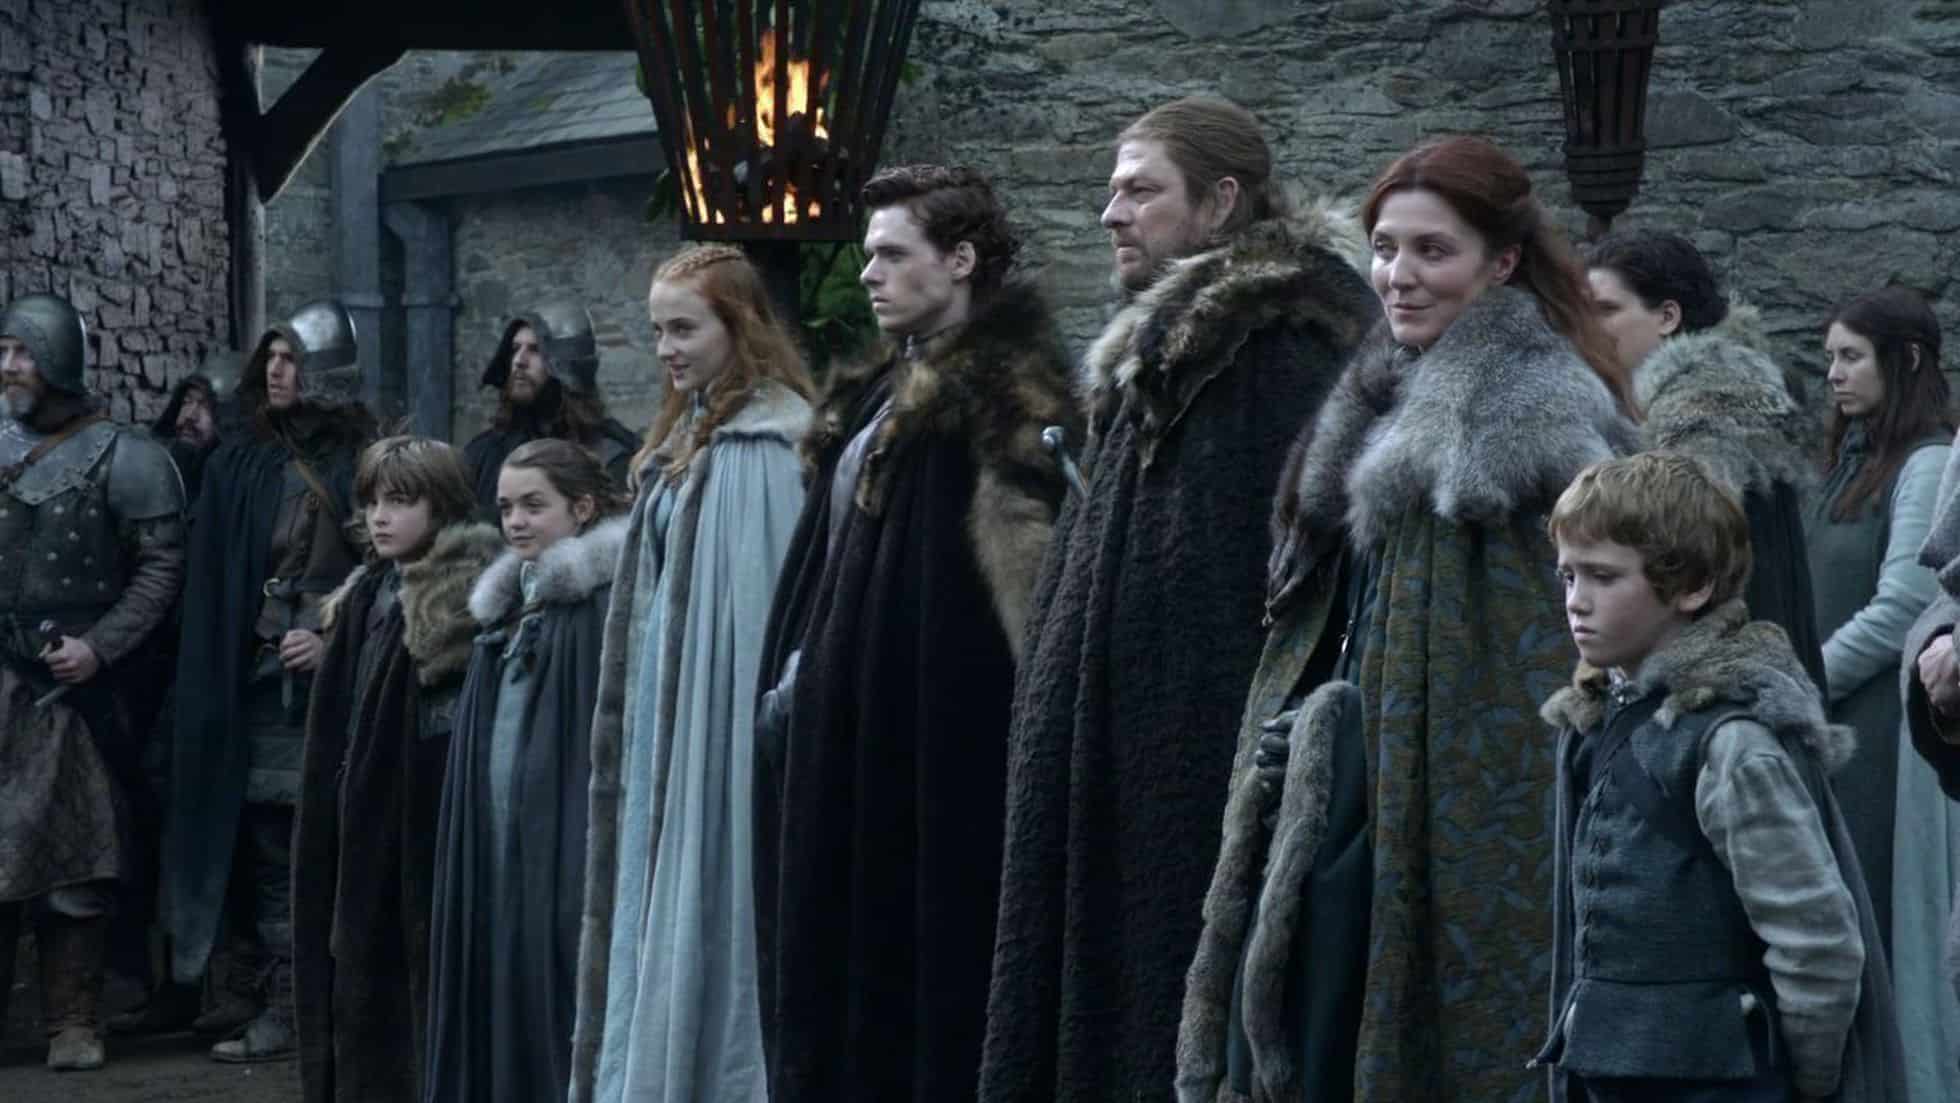 the image contains the members of house stark